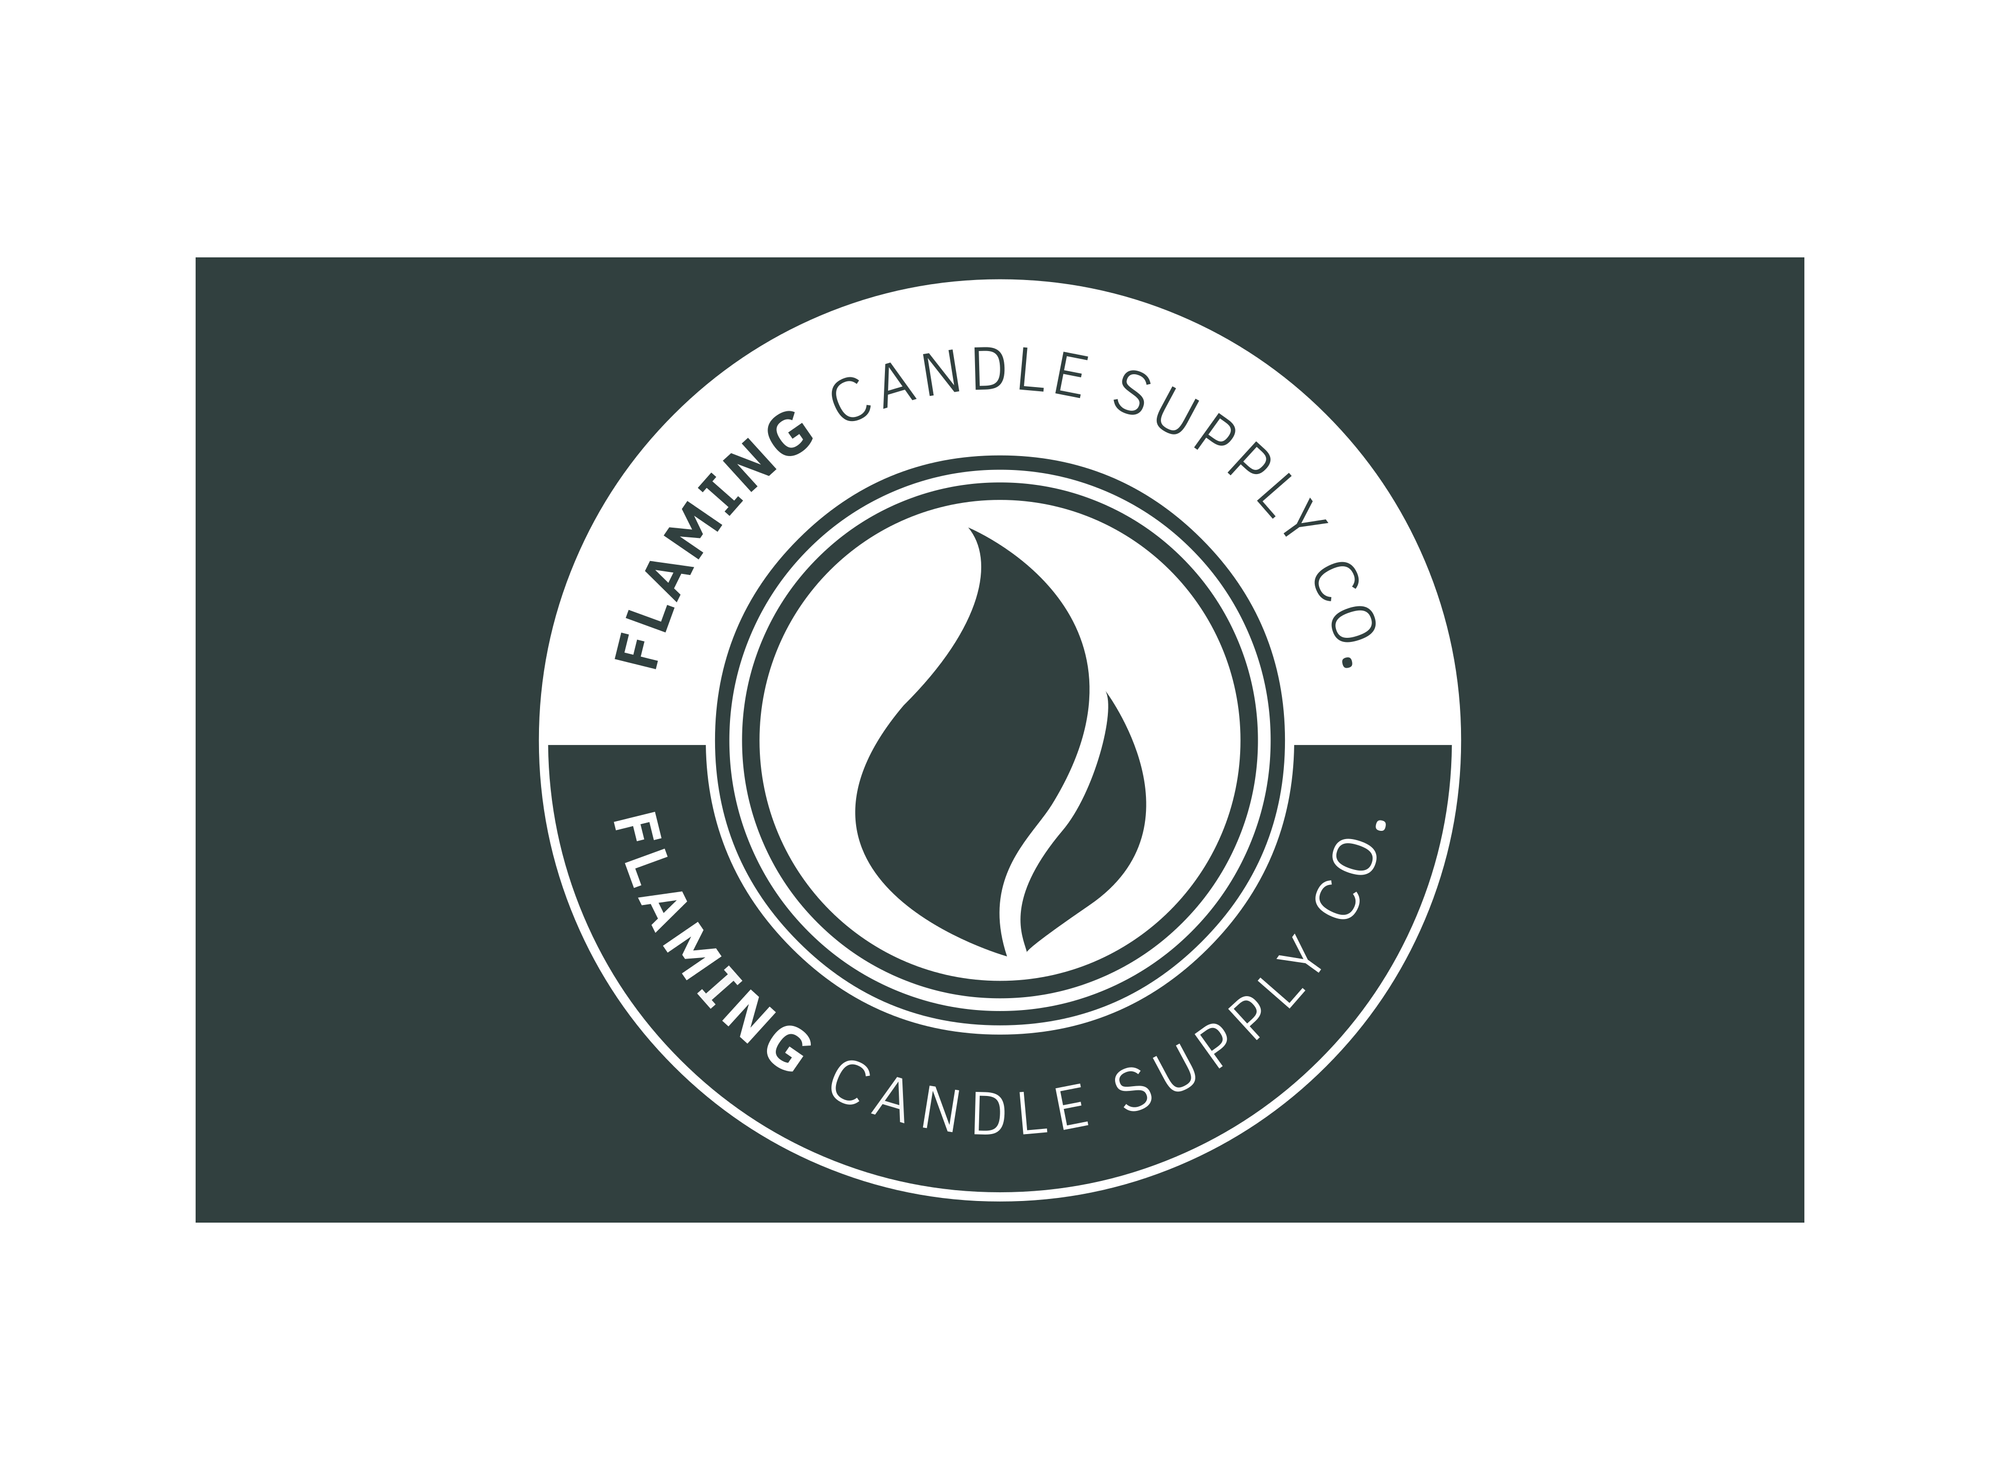 All-Natural Hand Crafted Products - Flaming Candle Supply Co.